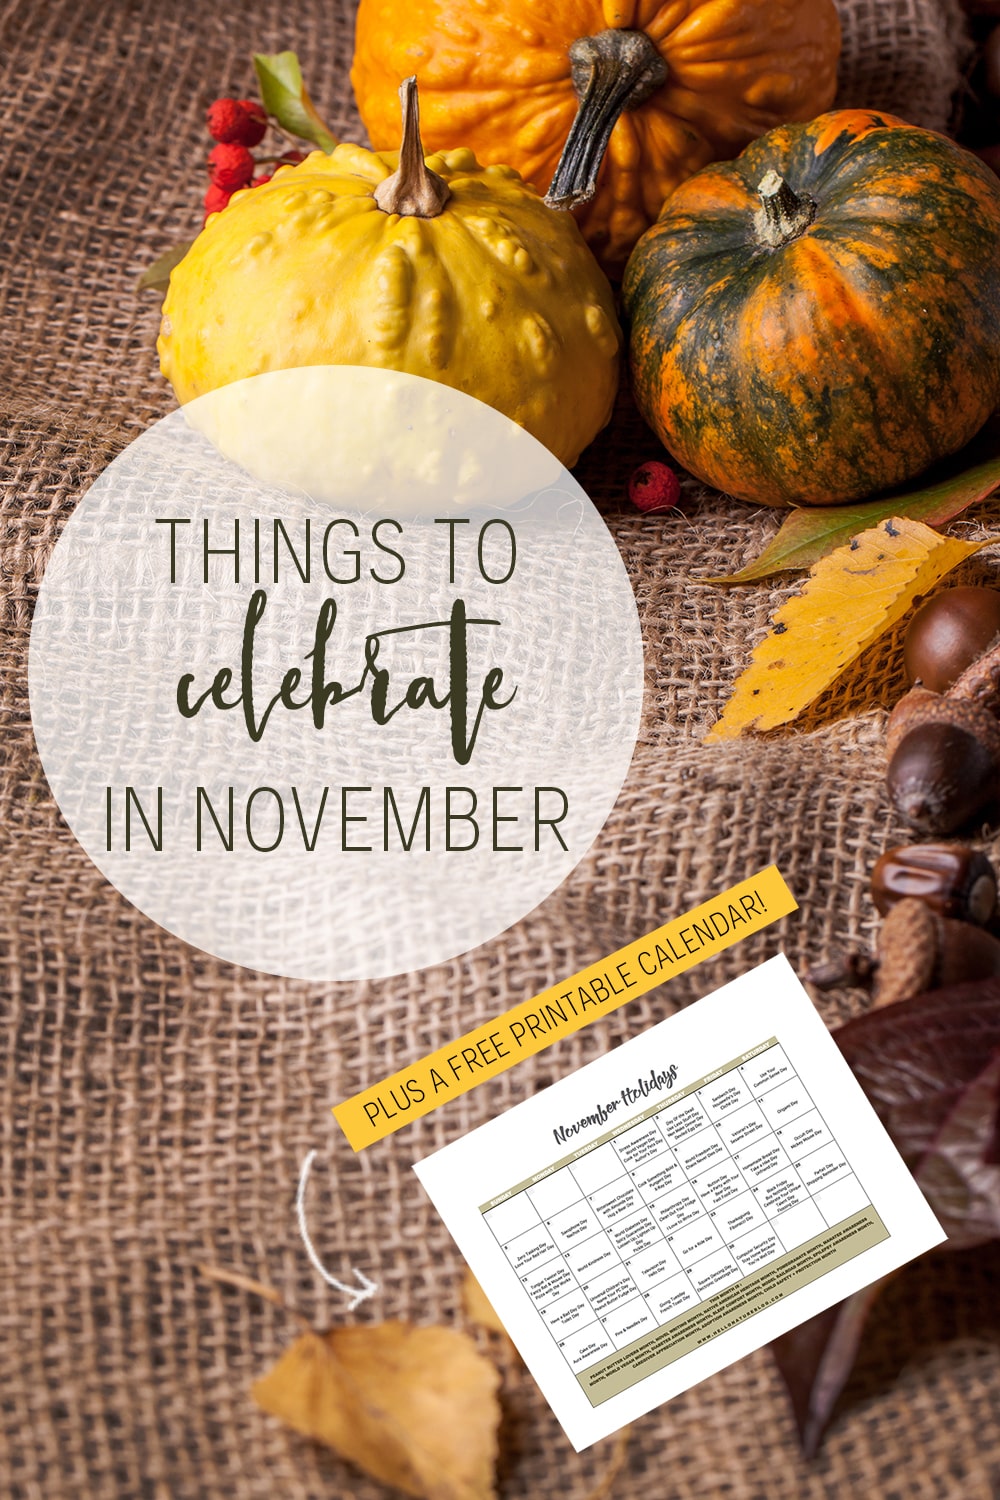 Thanksgiving isn't the only holiday worth celebrating next month. Use this free printable calendar to find every more things to celebrate in November!